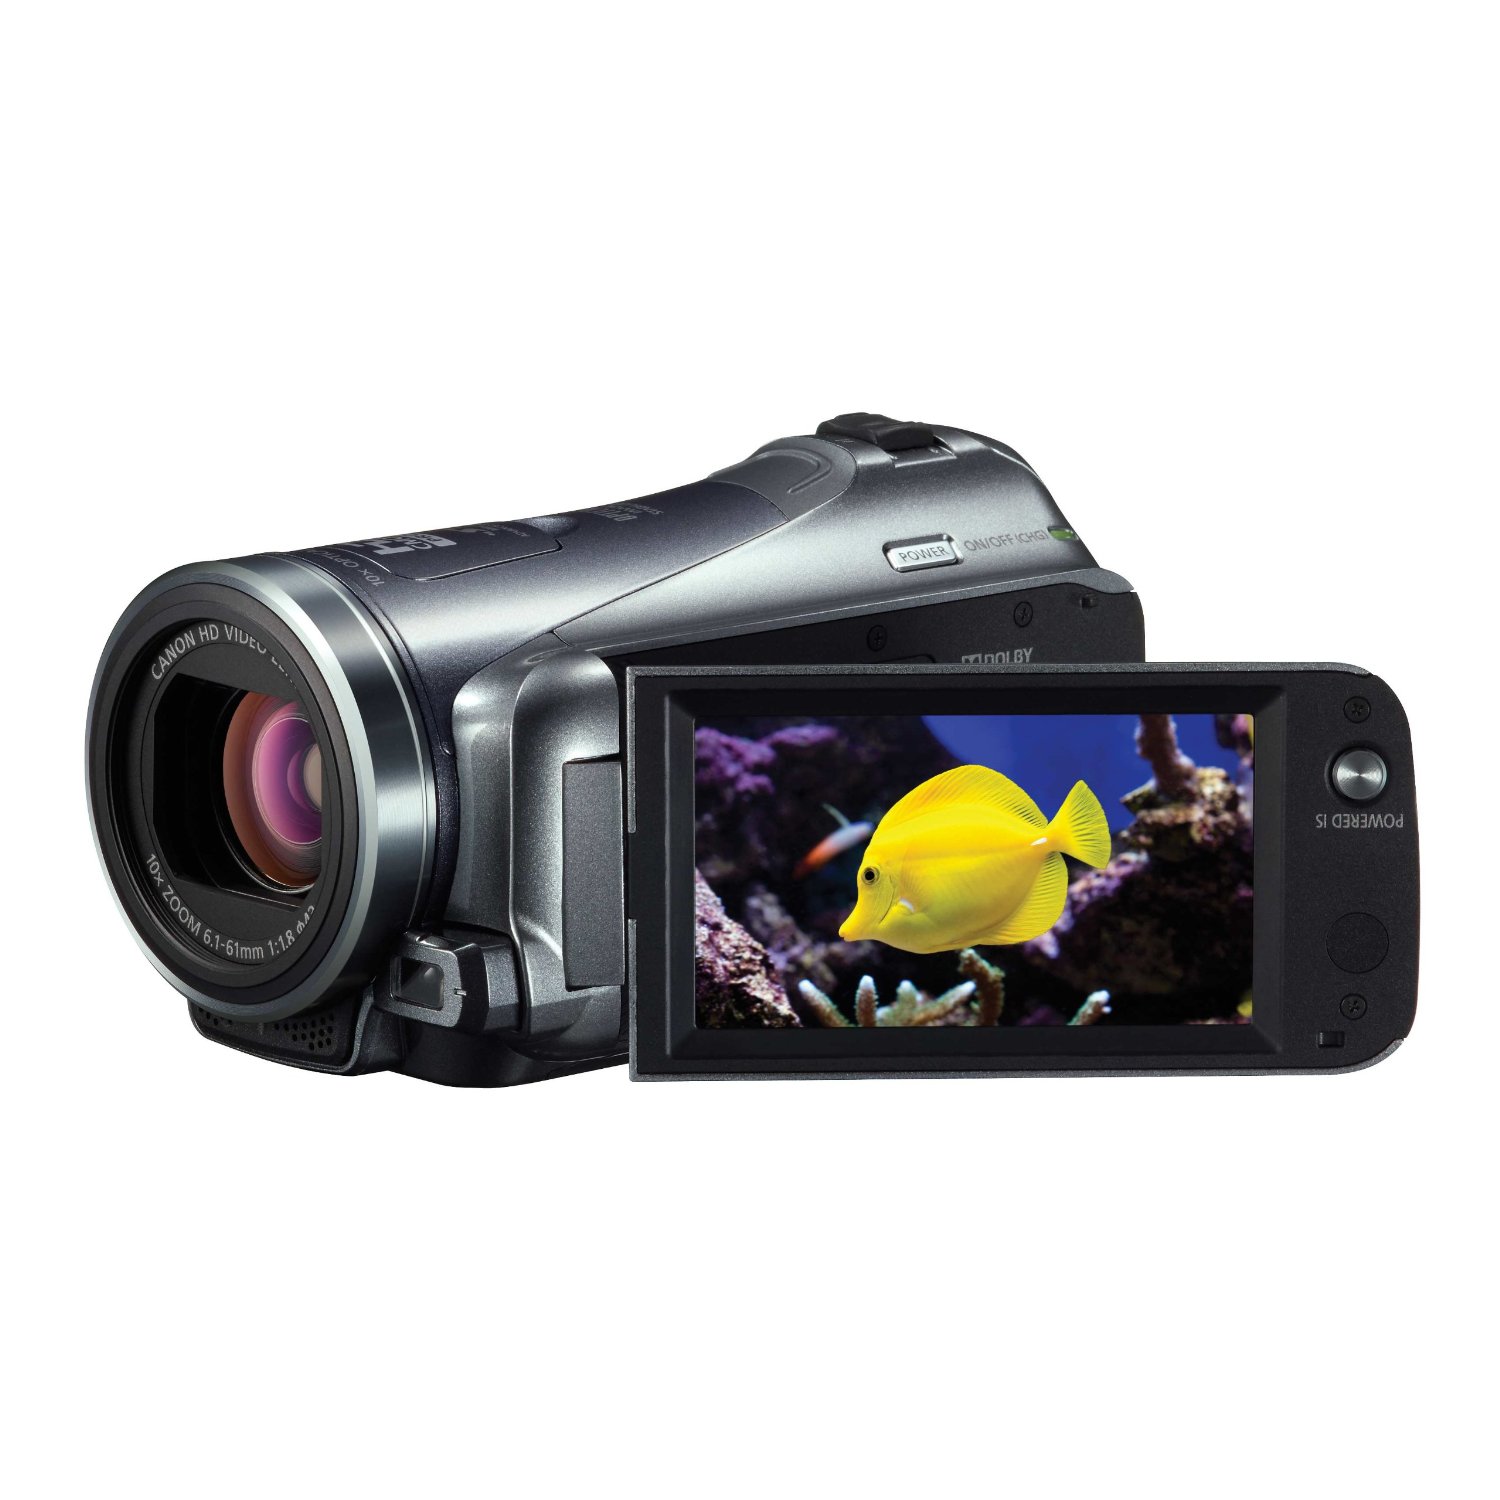 http://thetechjournal.com/wp-content/uploads/images/1111/1320517872-canon-vixia-hf-m400-full-hd-camcorder-33.jpg